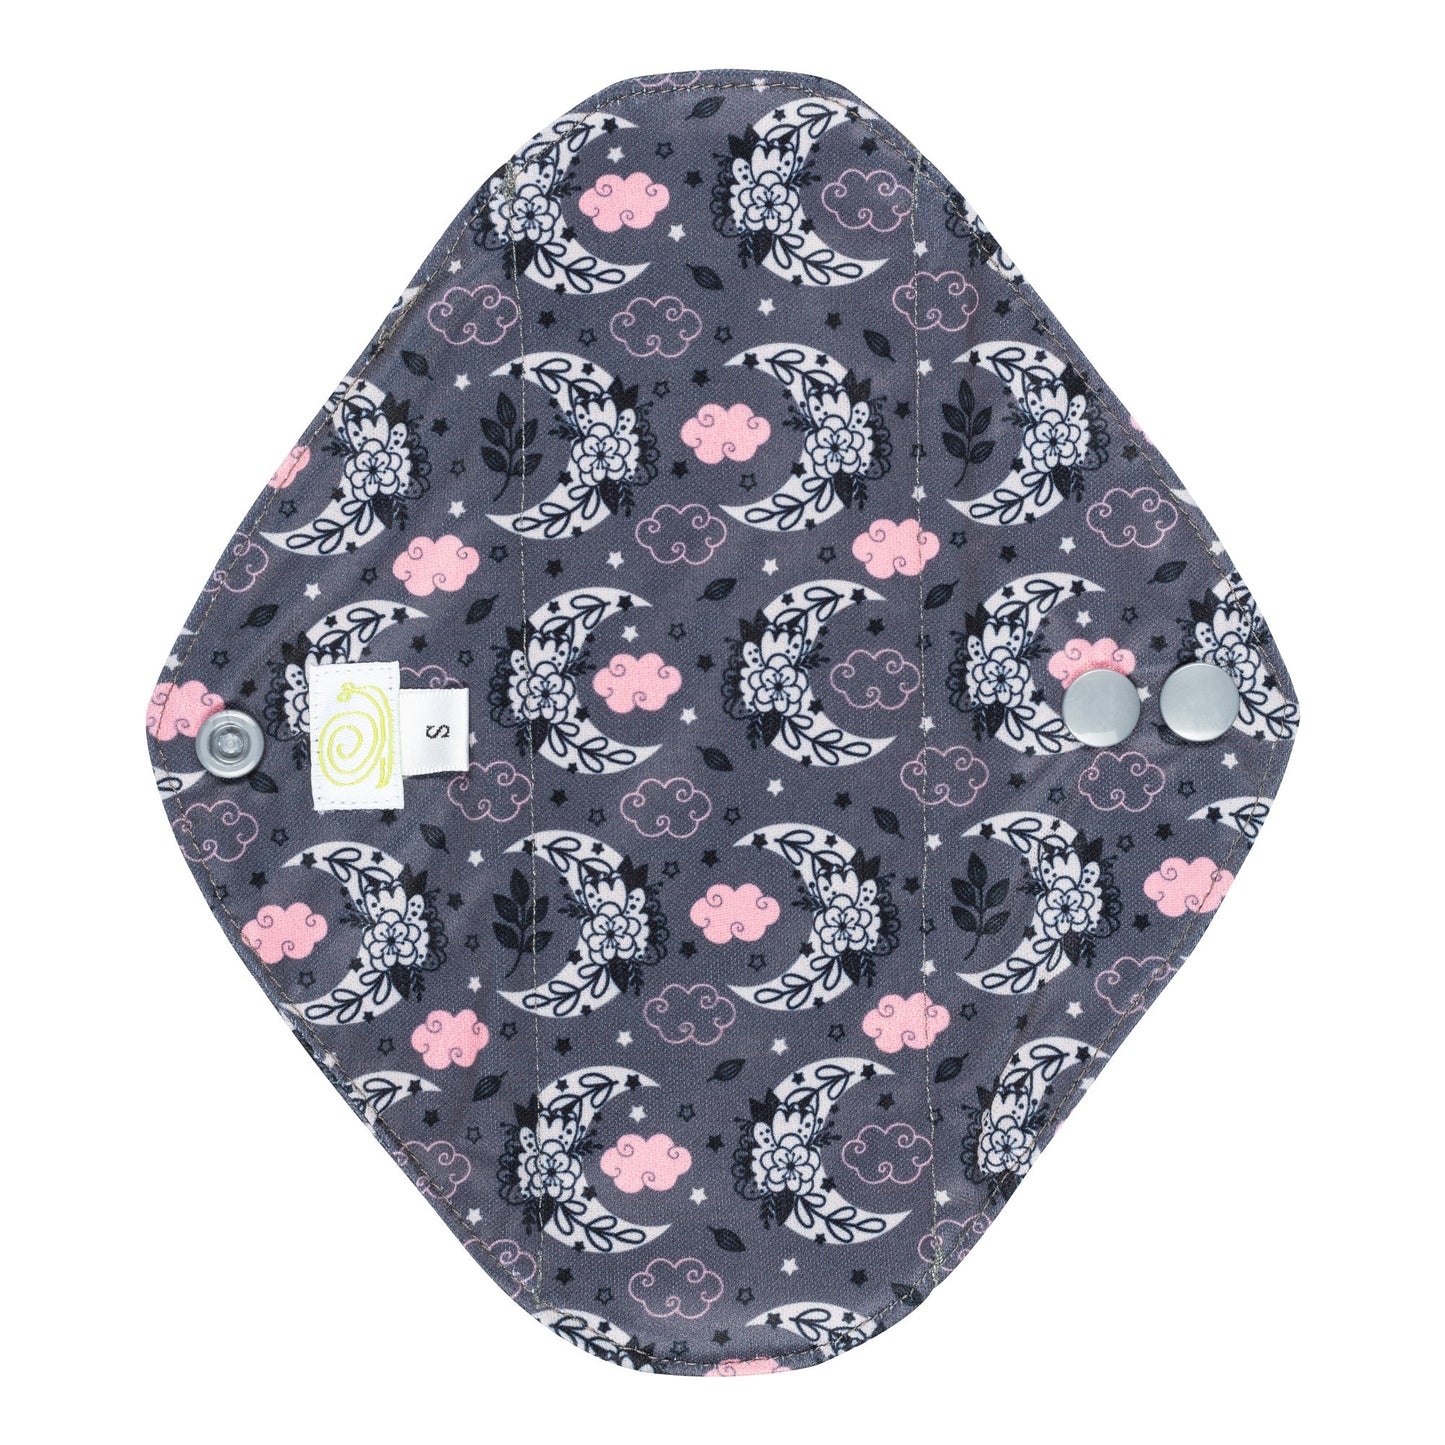 Reusable Sanitary Pad with a black background and a white and pink moon and cloud design on it.